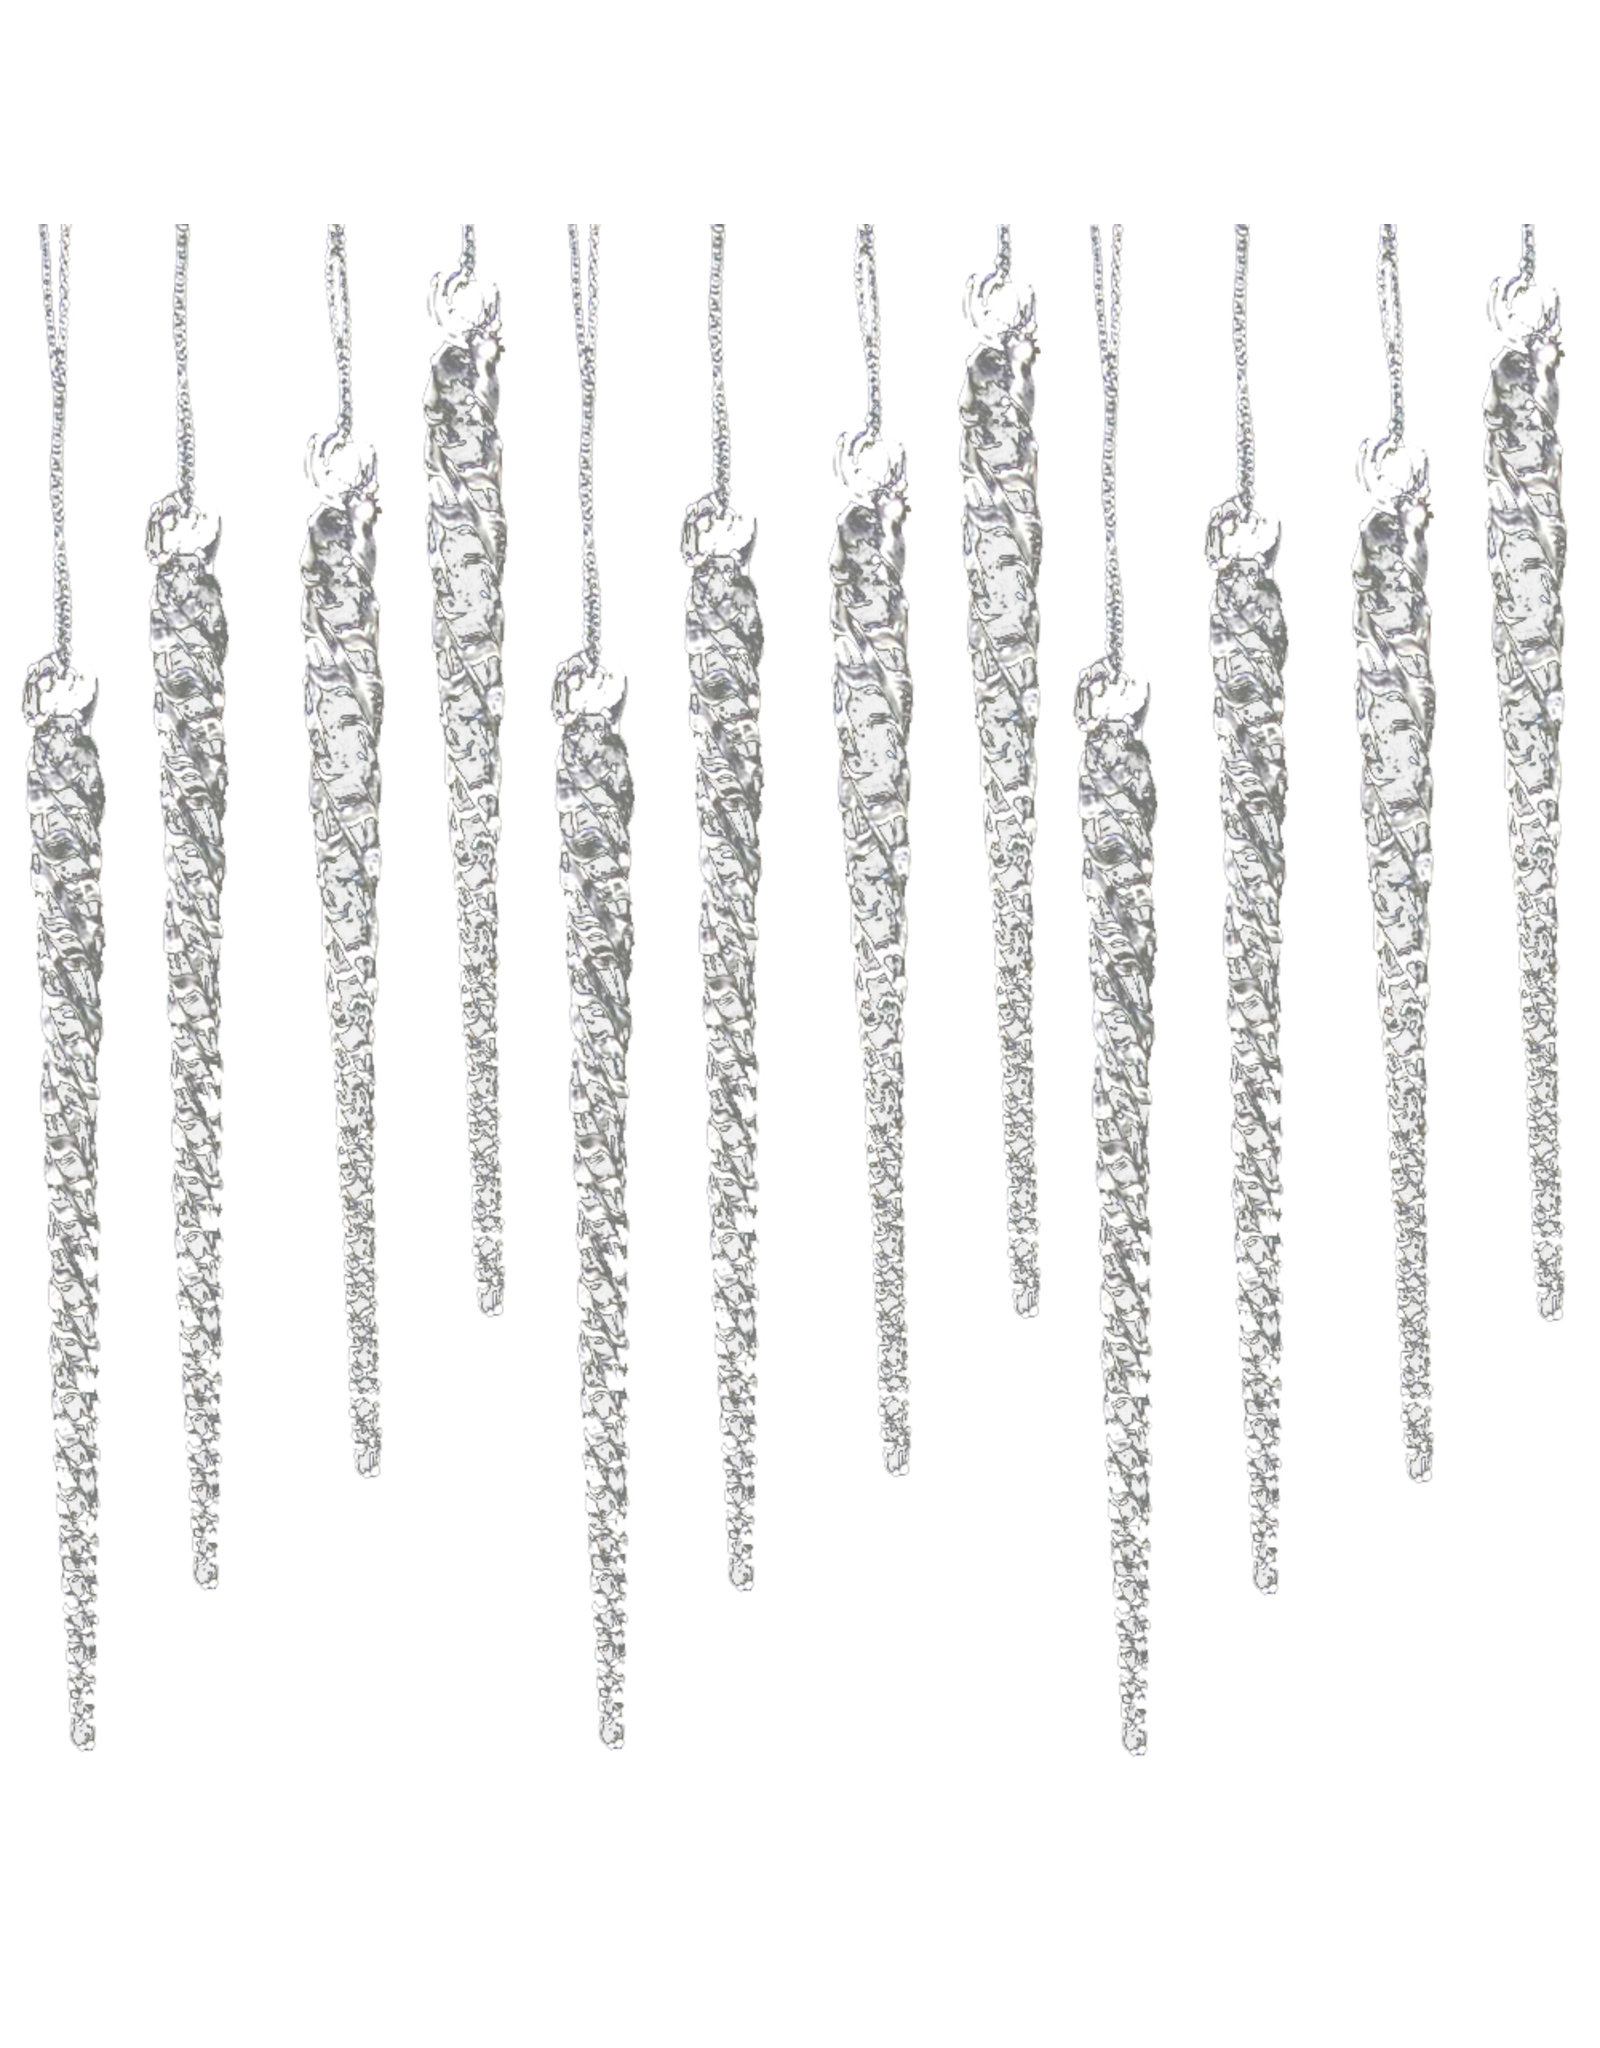 Kurt Adler Twisted Clear Glass Icicle Ornaments12pc 5.25 Inch